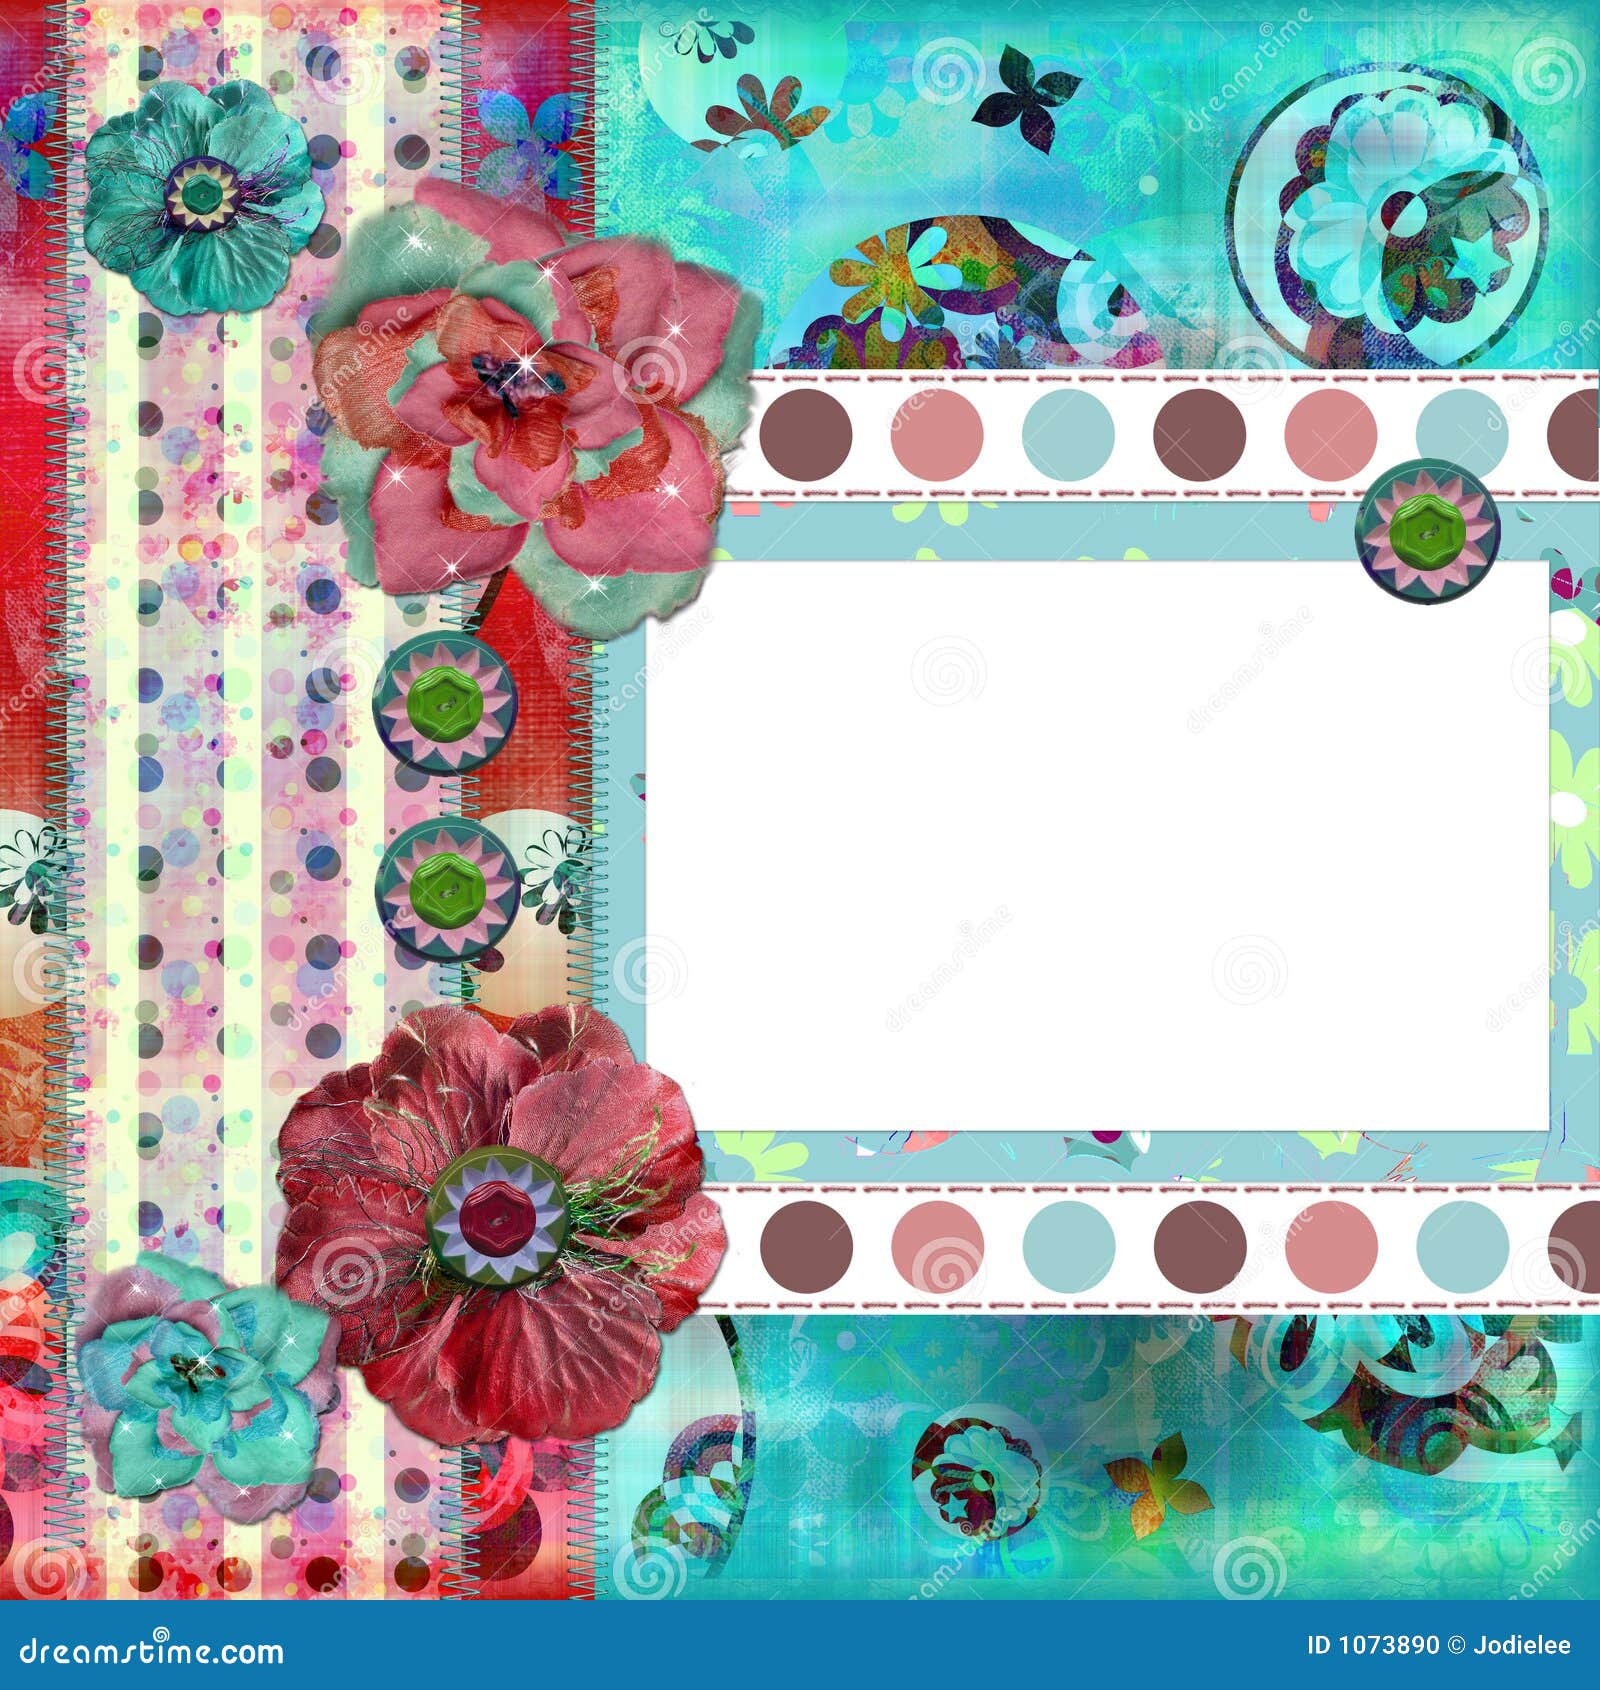 shabby floral photo frame or scrapbooking background